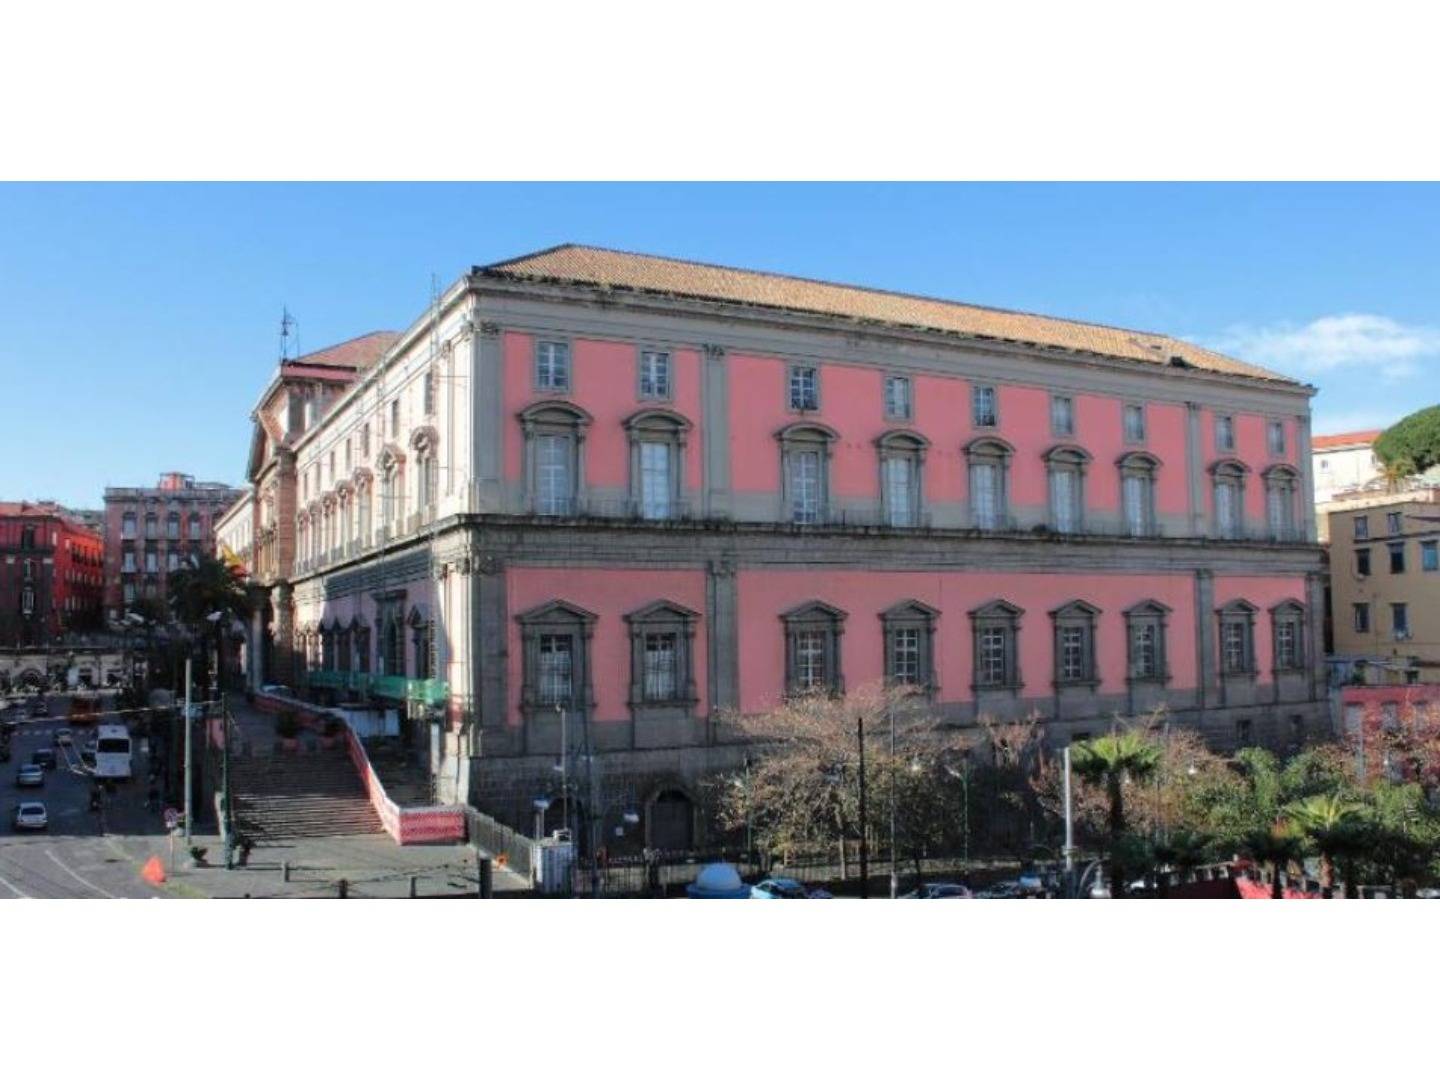 Napoli Bed and Breakfast